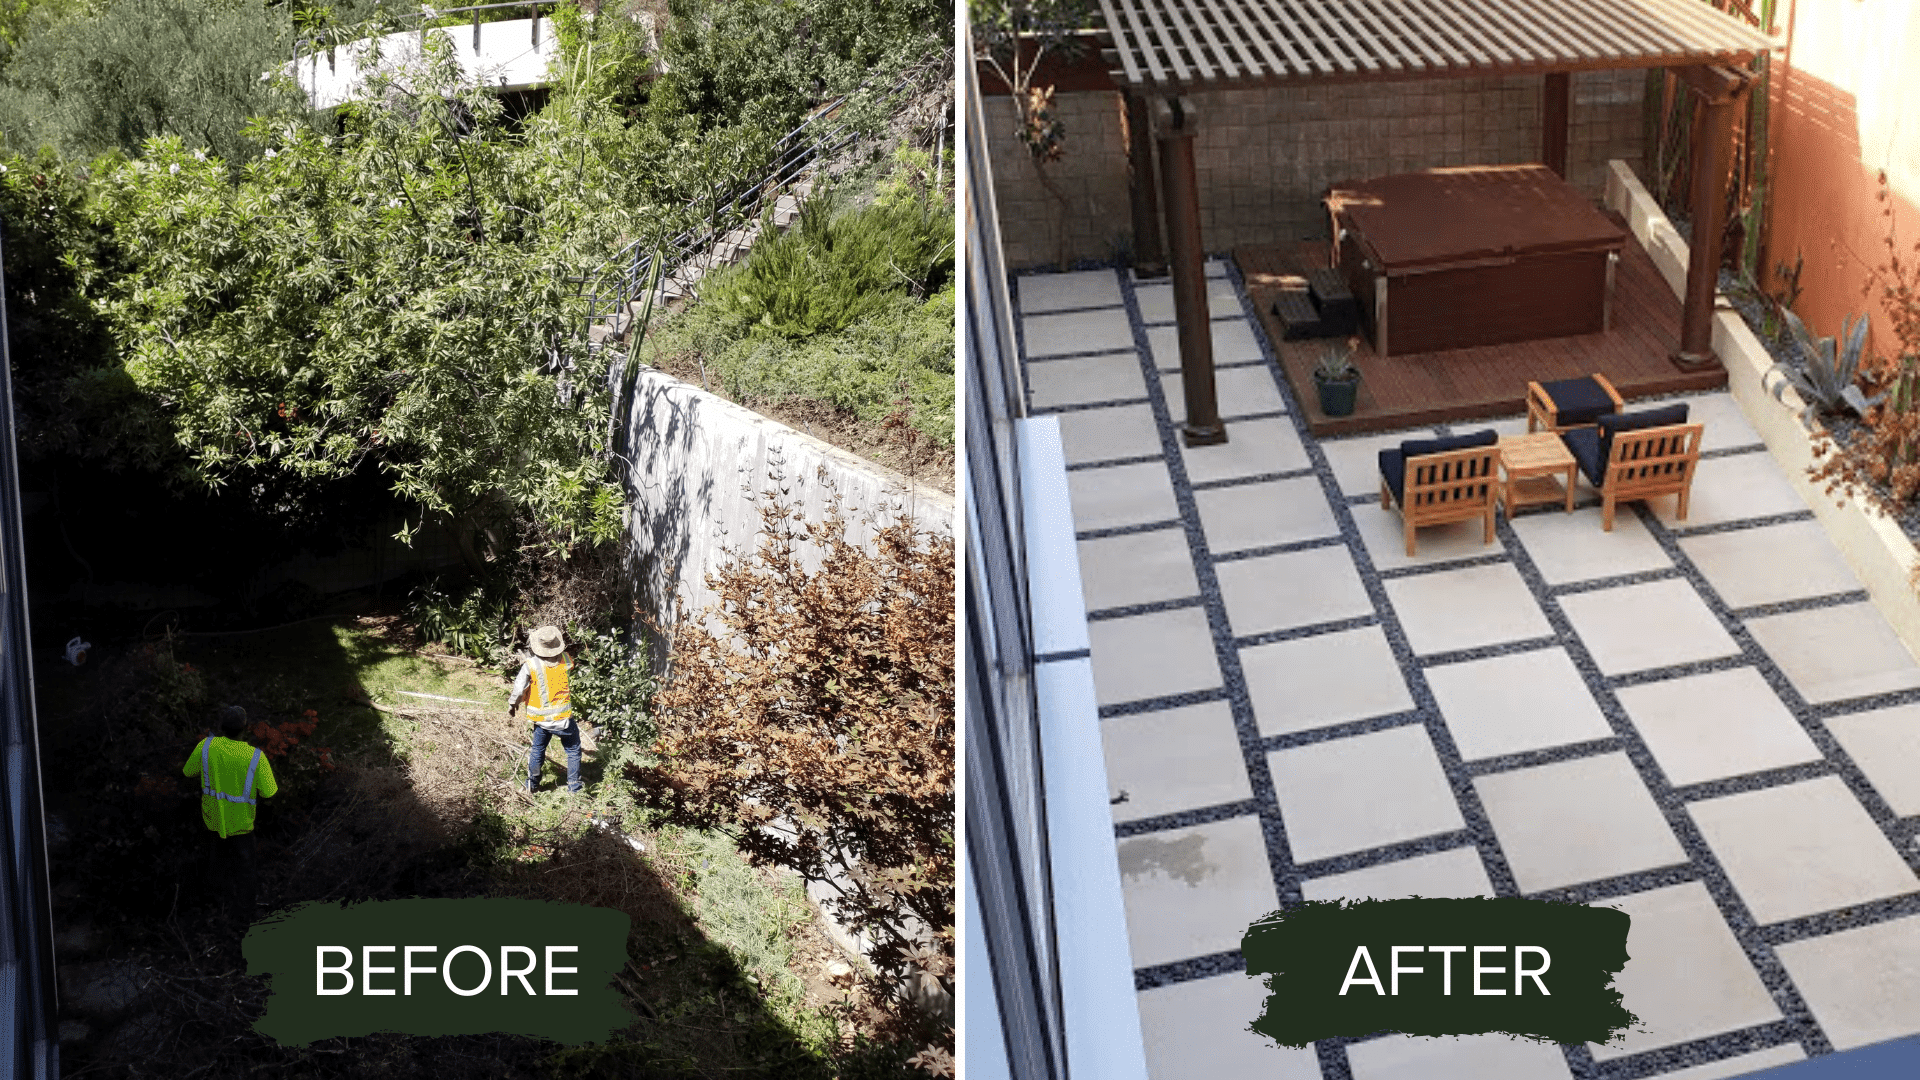 BEFORE AND AFTER BACKYARD RENOVATION